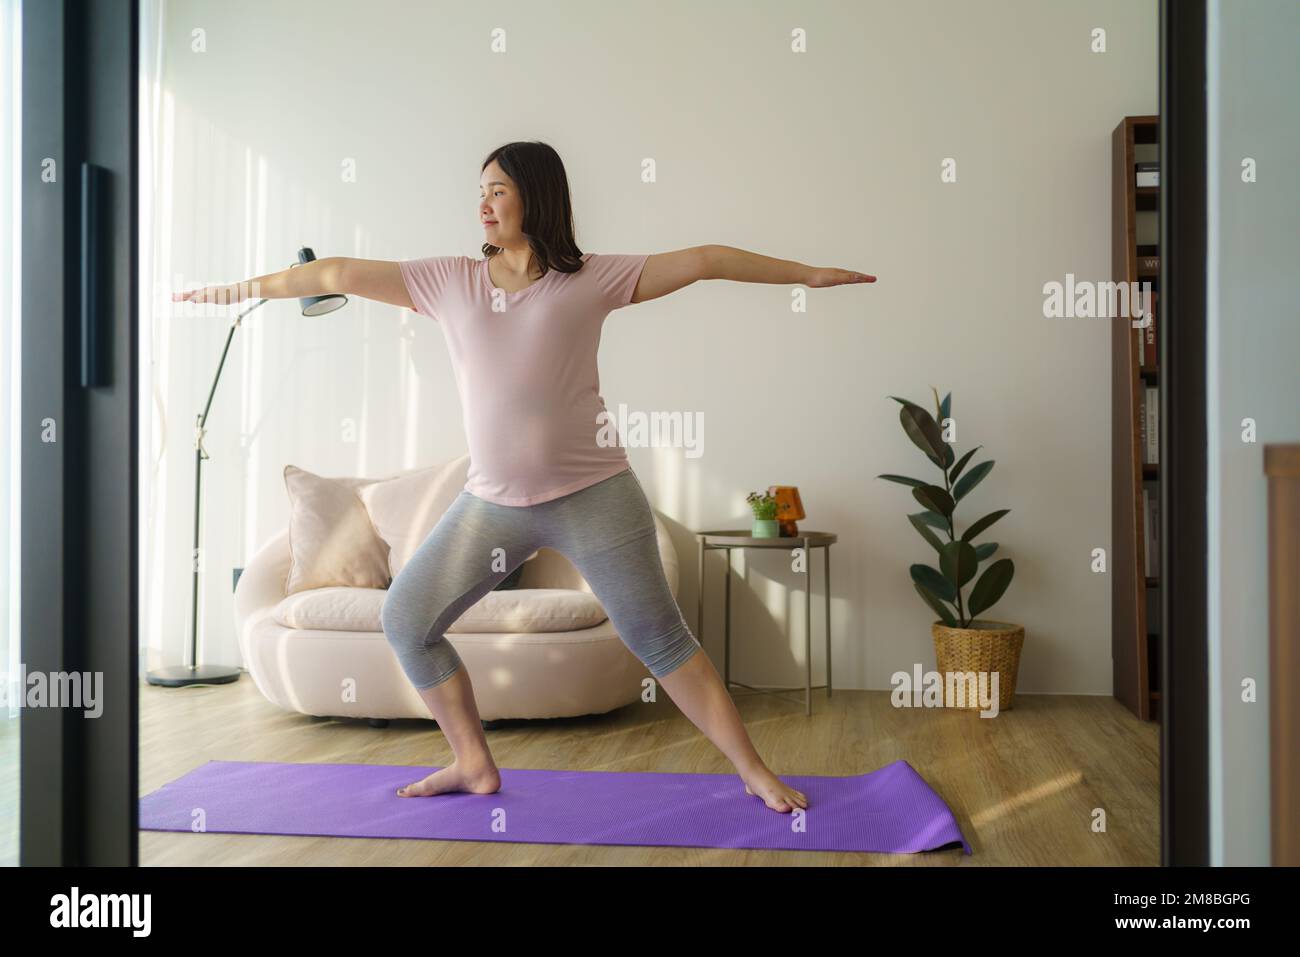 Full length healthy 6 months pregnant calm Asian woman meditating or doing yoga exercise at home. Relaxation and stretching. Stock Photo